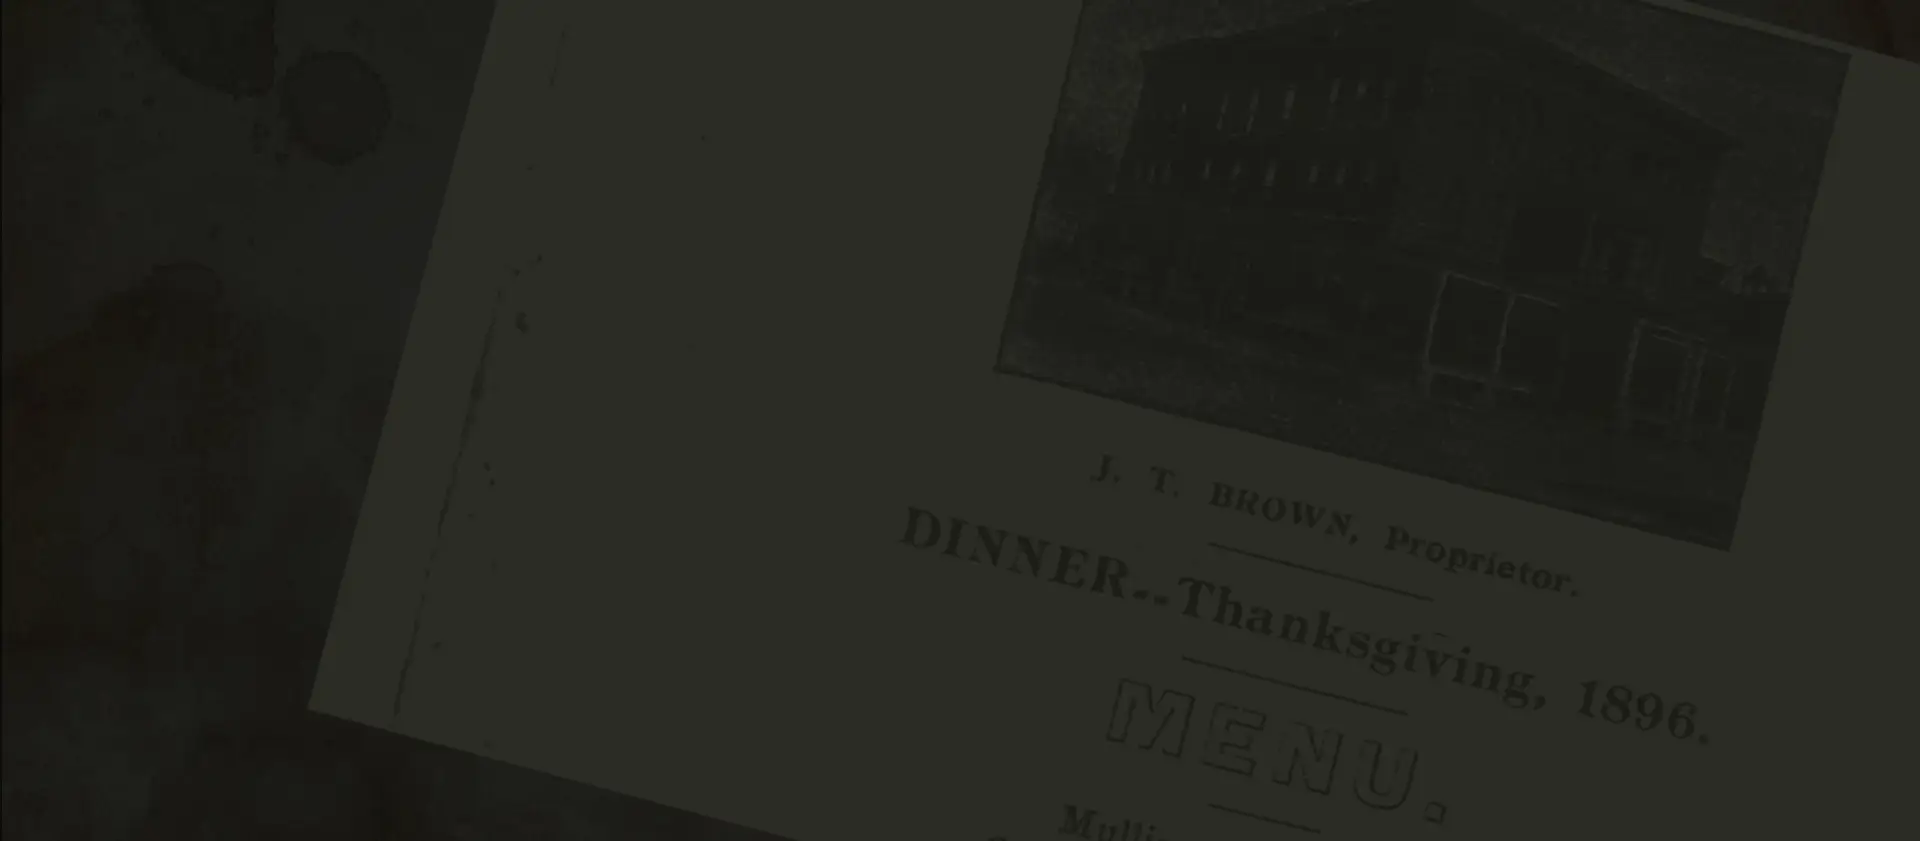 Background photo of a very old menu from The Social restaurant